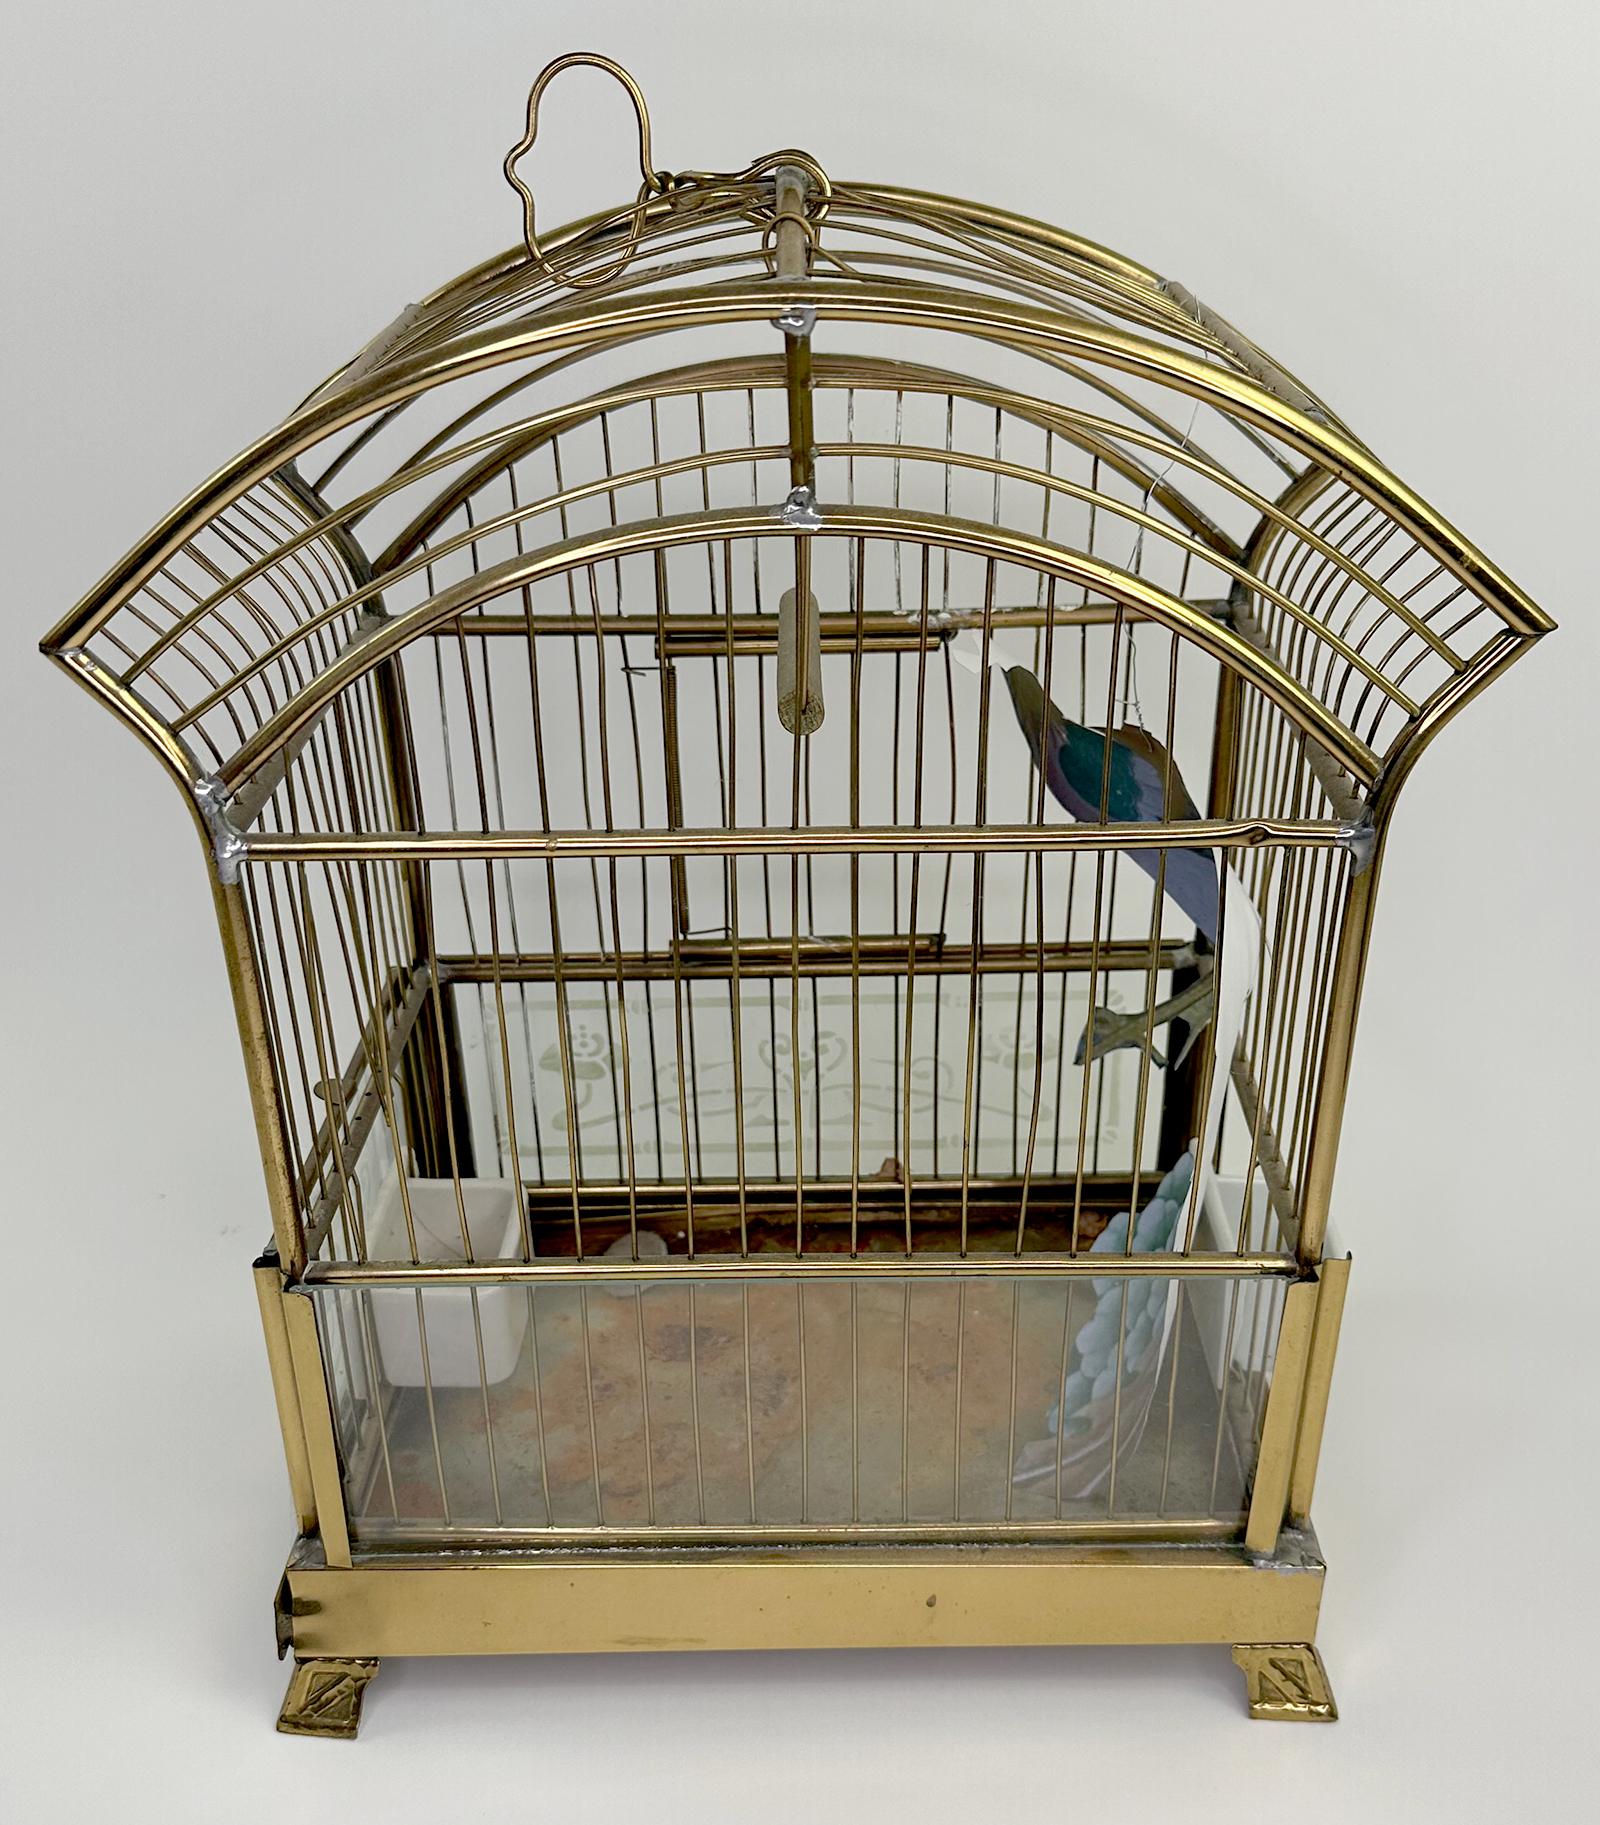 An elegantly crafted and charming crown vintage birdcage. Primarily made with brass. Small bits of glass with frosted etched designs stand around the bottom of the cage. 

This cage has legs to support it, or it could be hung from the top. Small